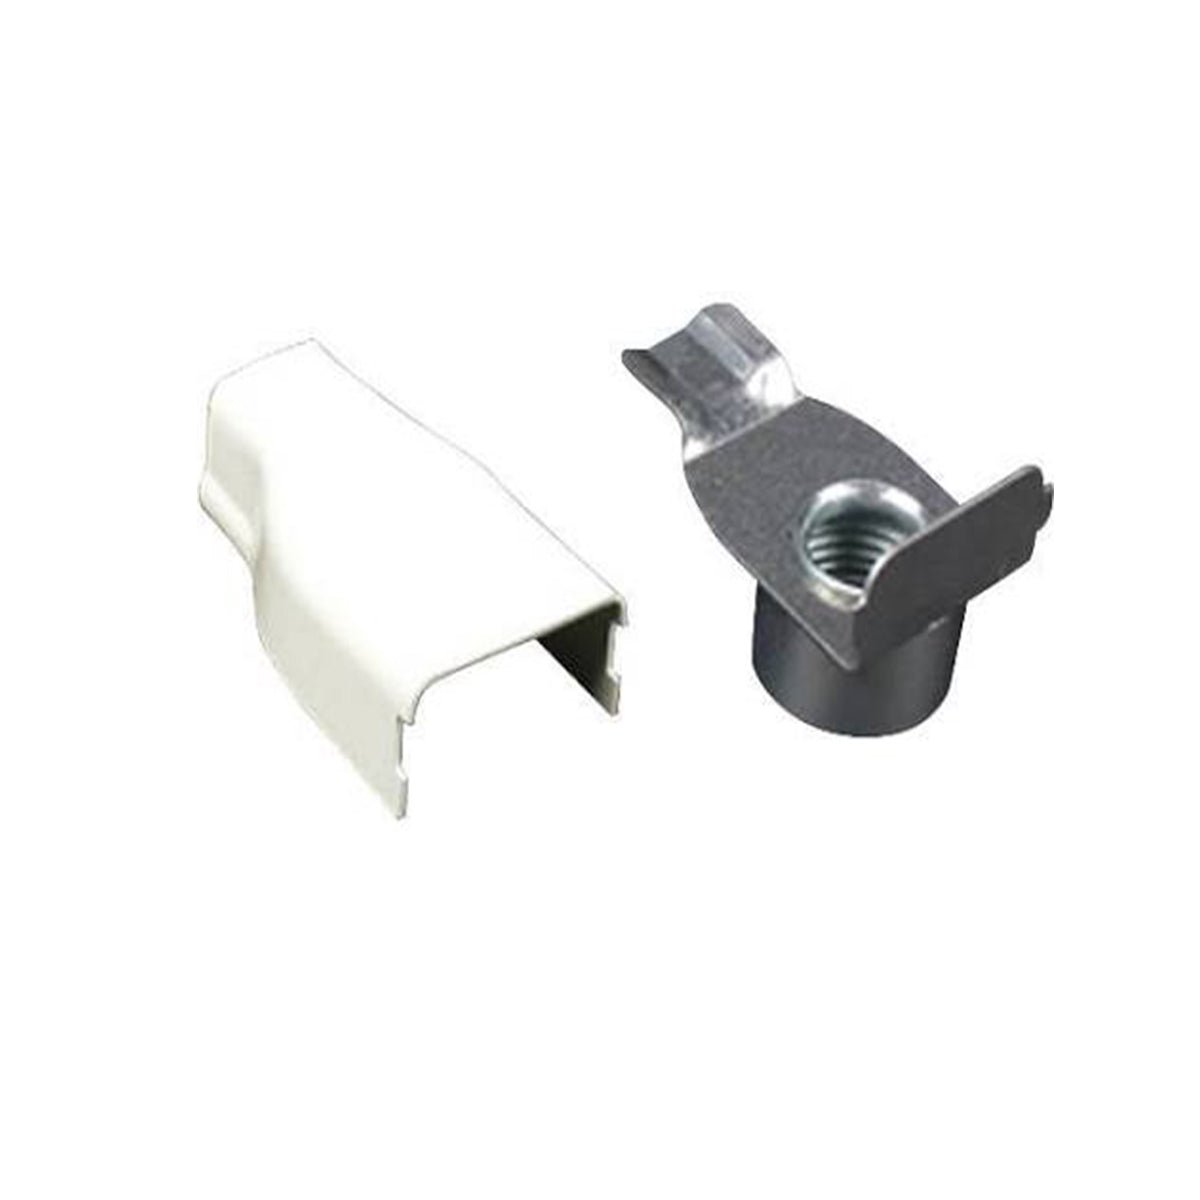 Wiremold V5785 - Steel Combination Connector Ivory